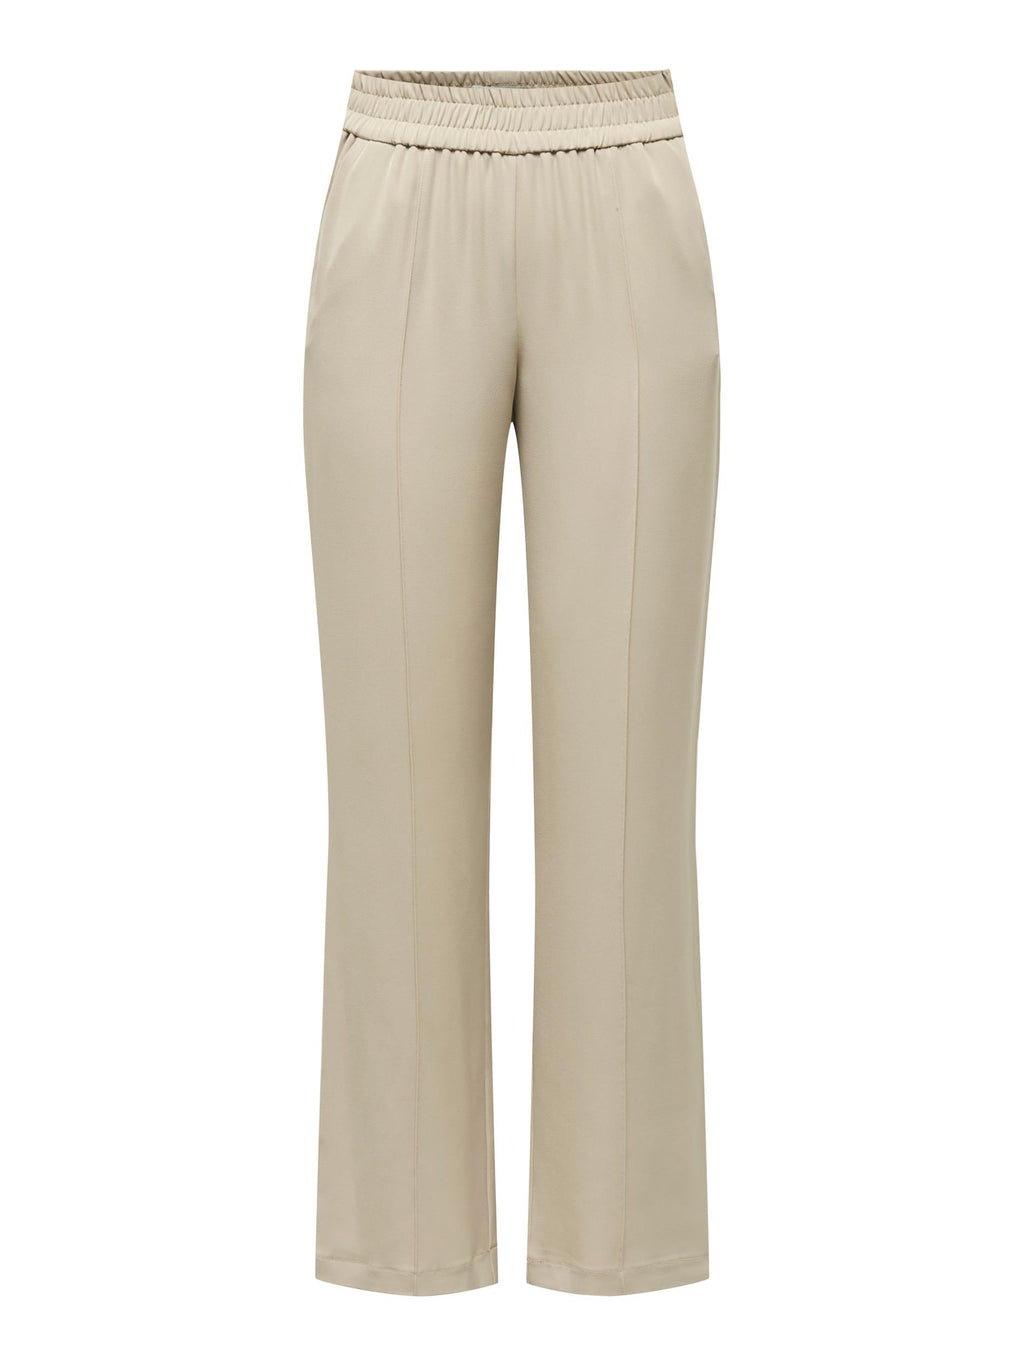 Lucy-Laura Wide Pants - Oxford Tan